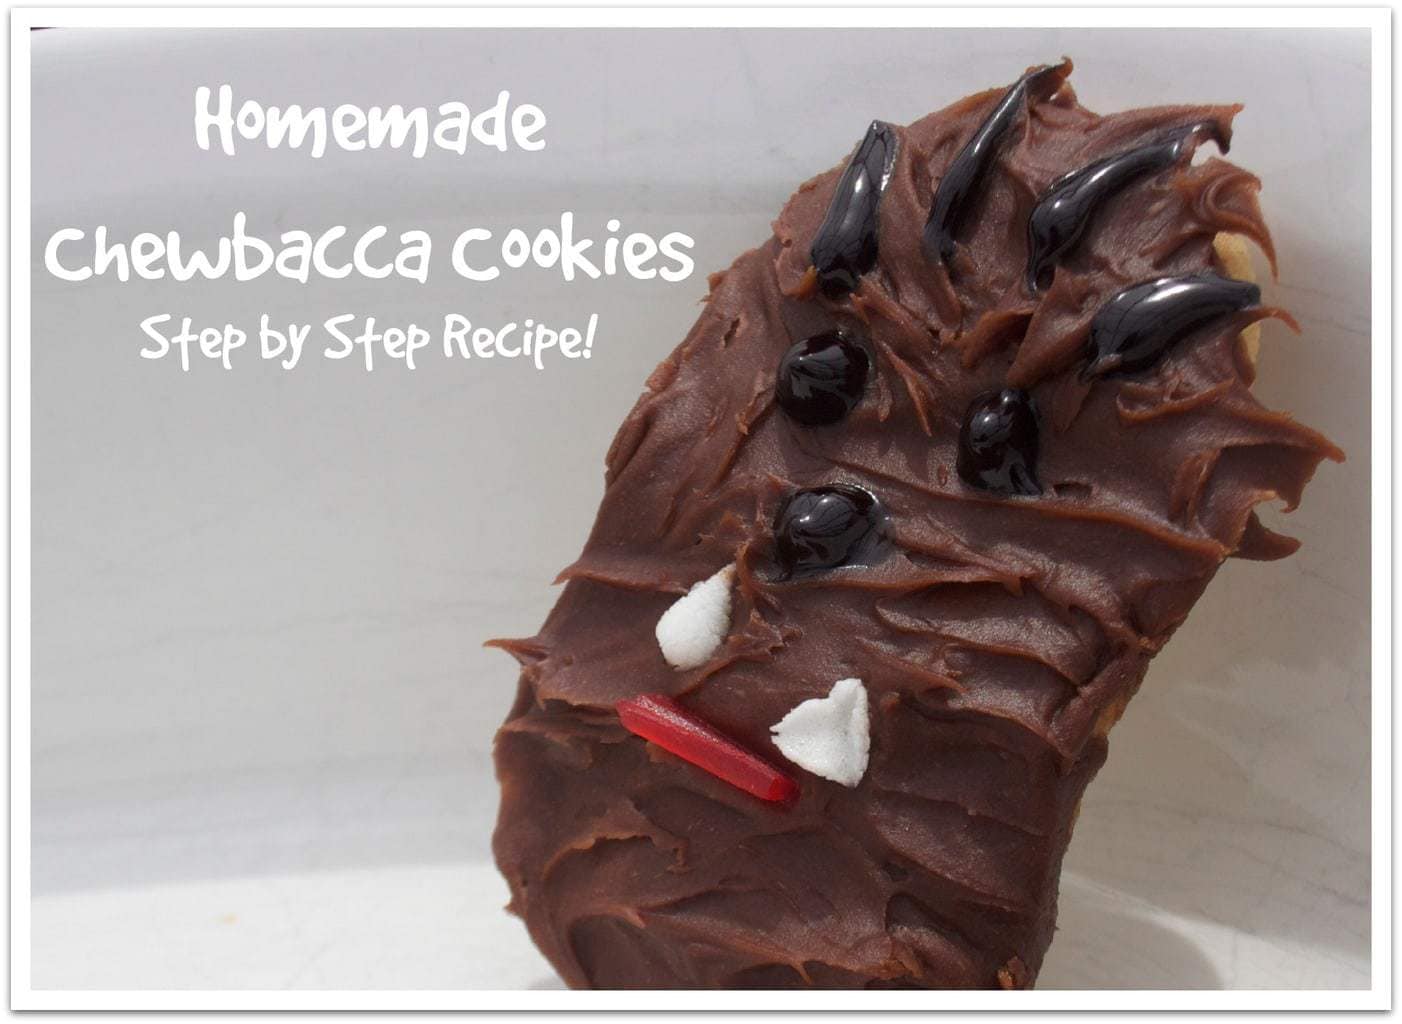 Easy to Make Chewbacca Cookies!